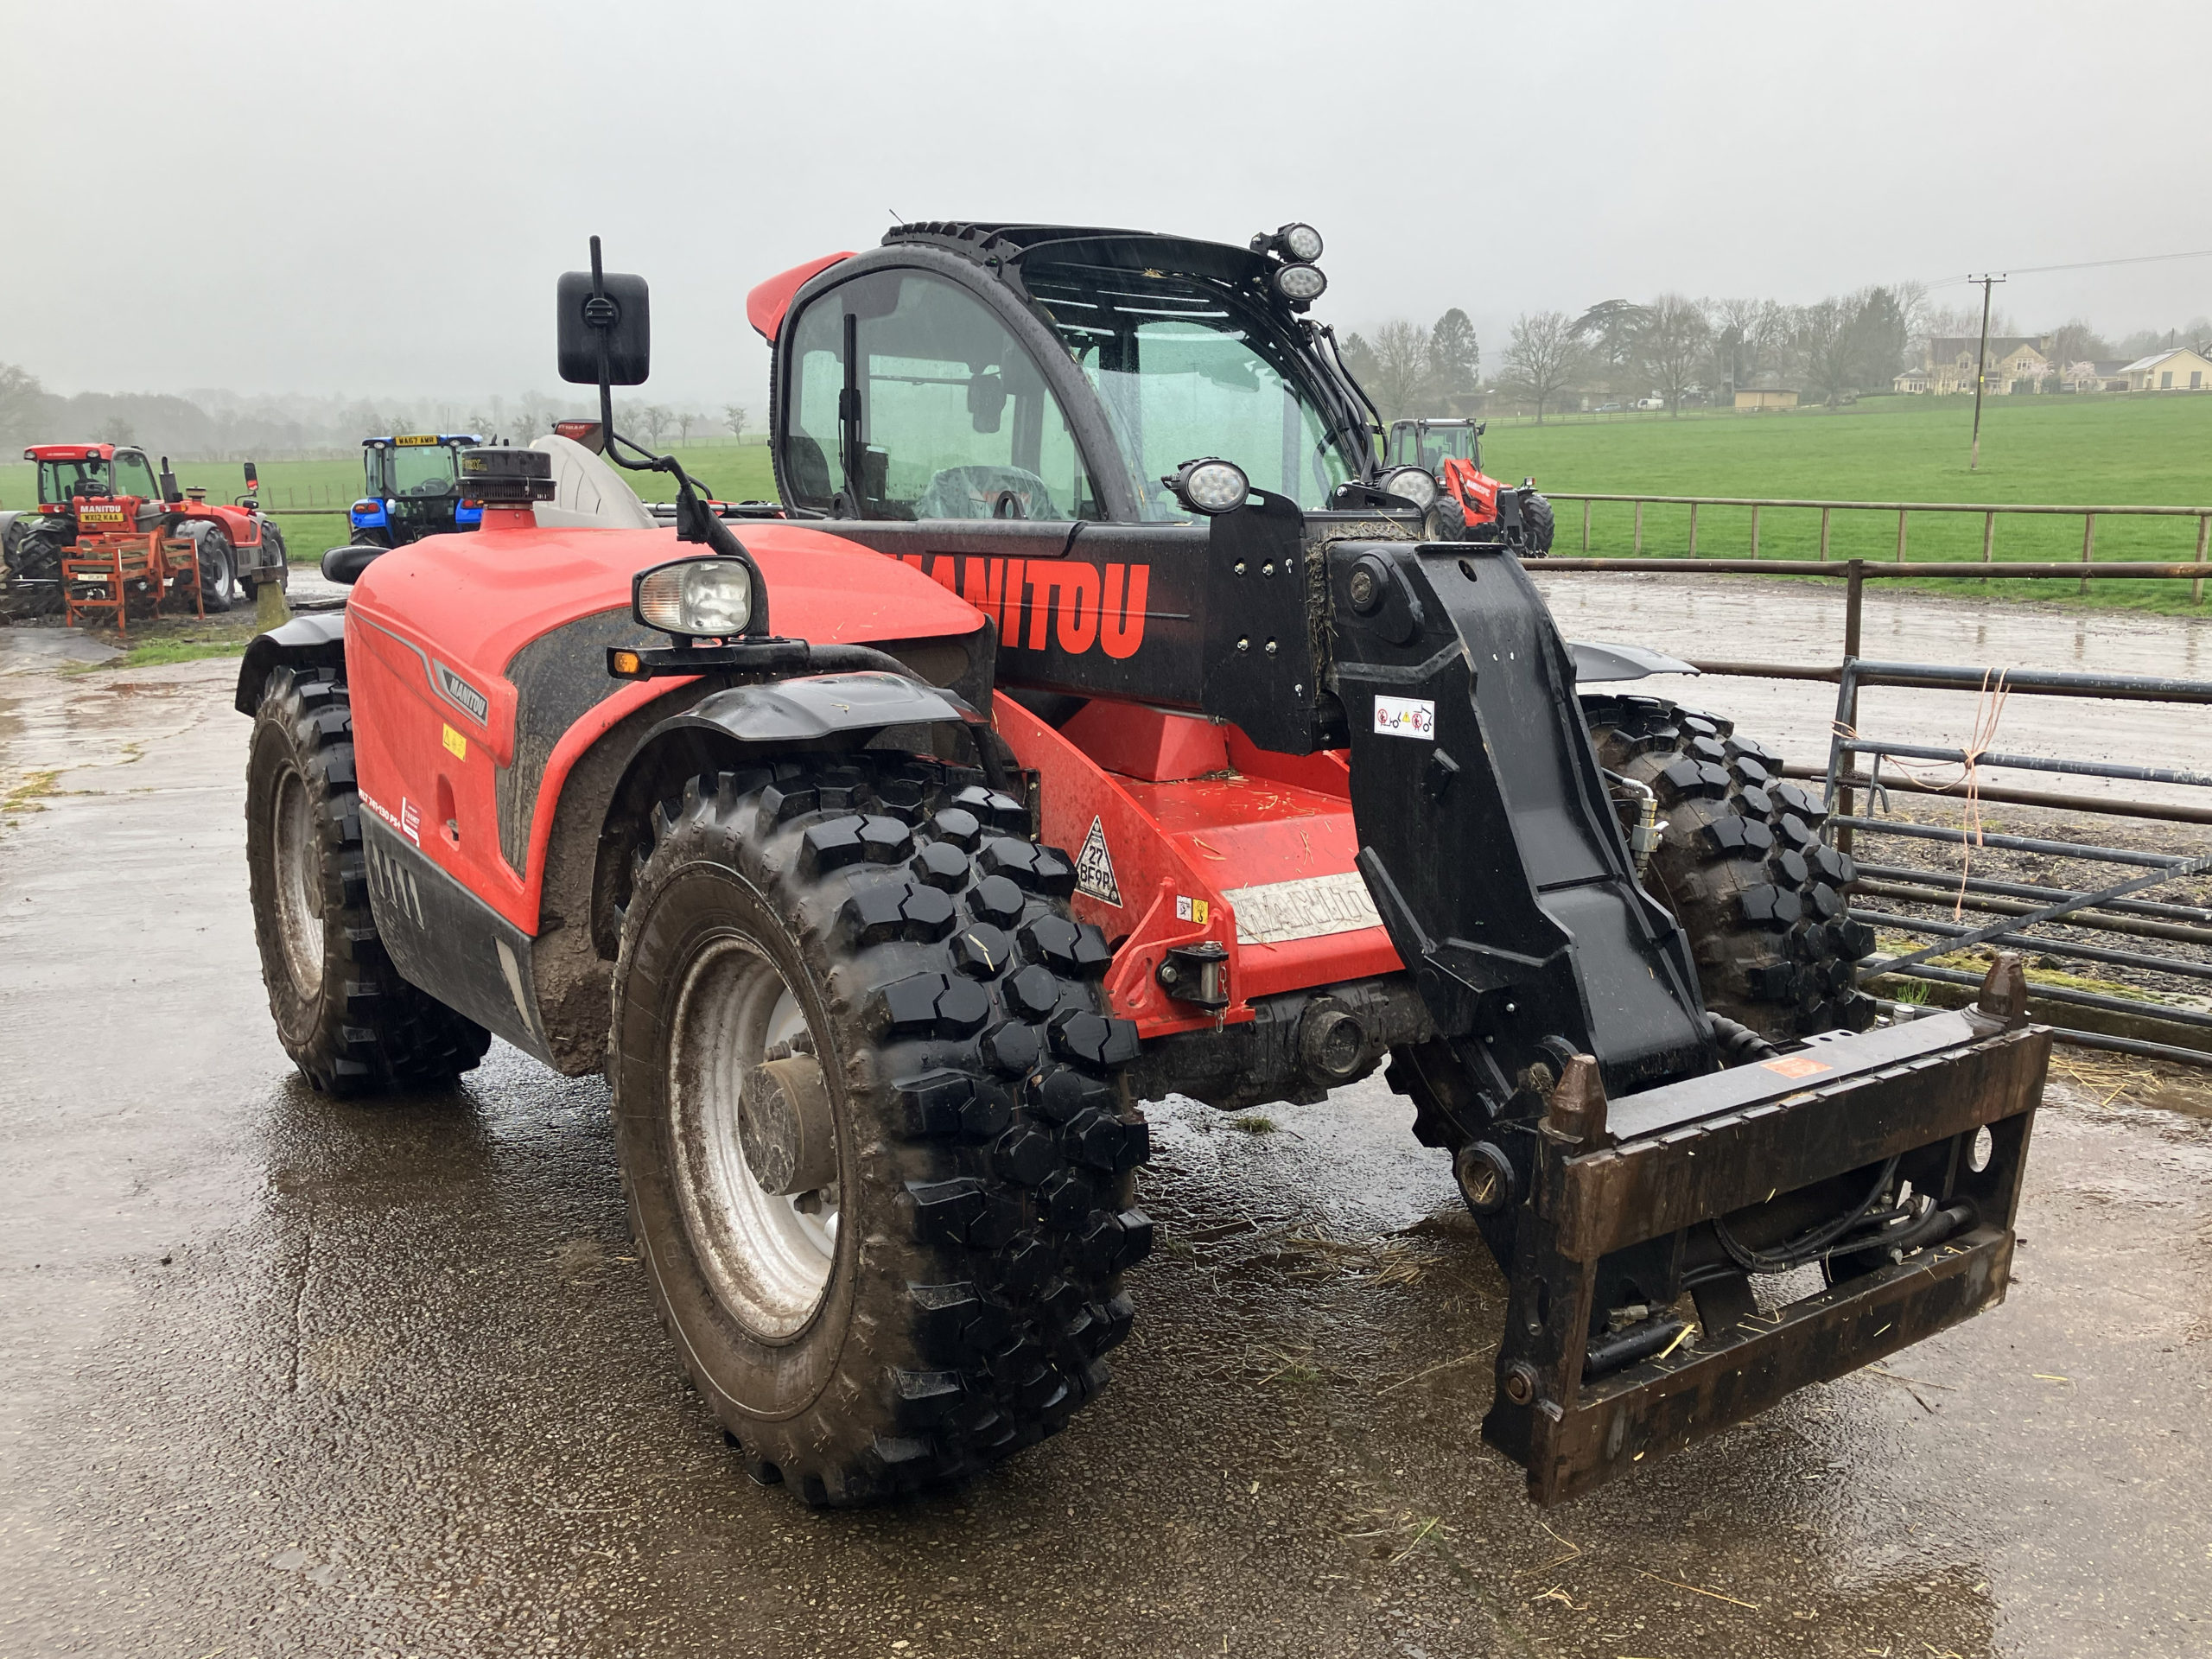 Manitou’s MLT 741 is a real workhorse on the Stud Farm